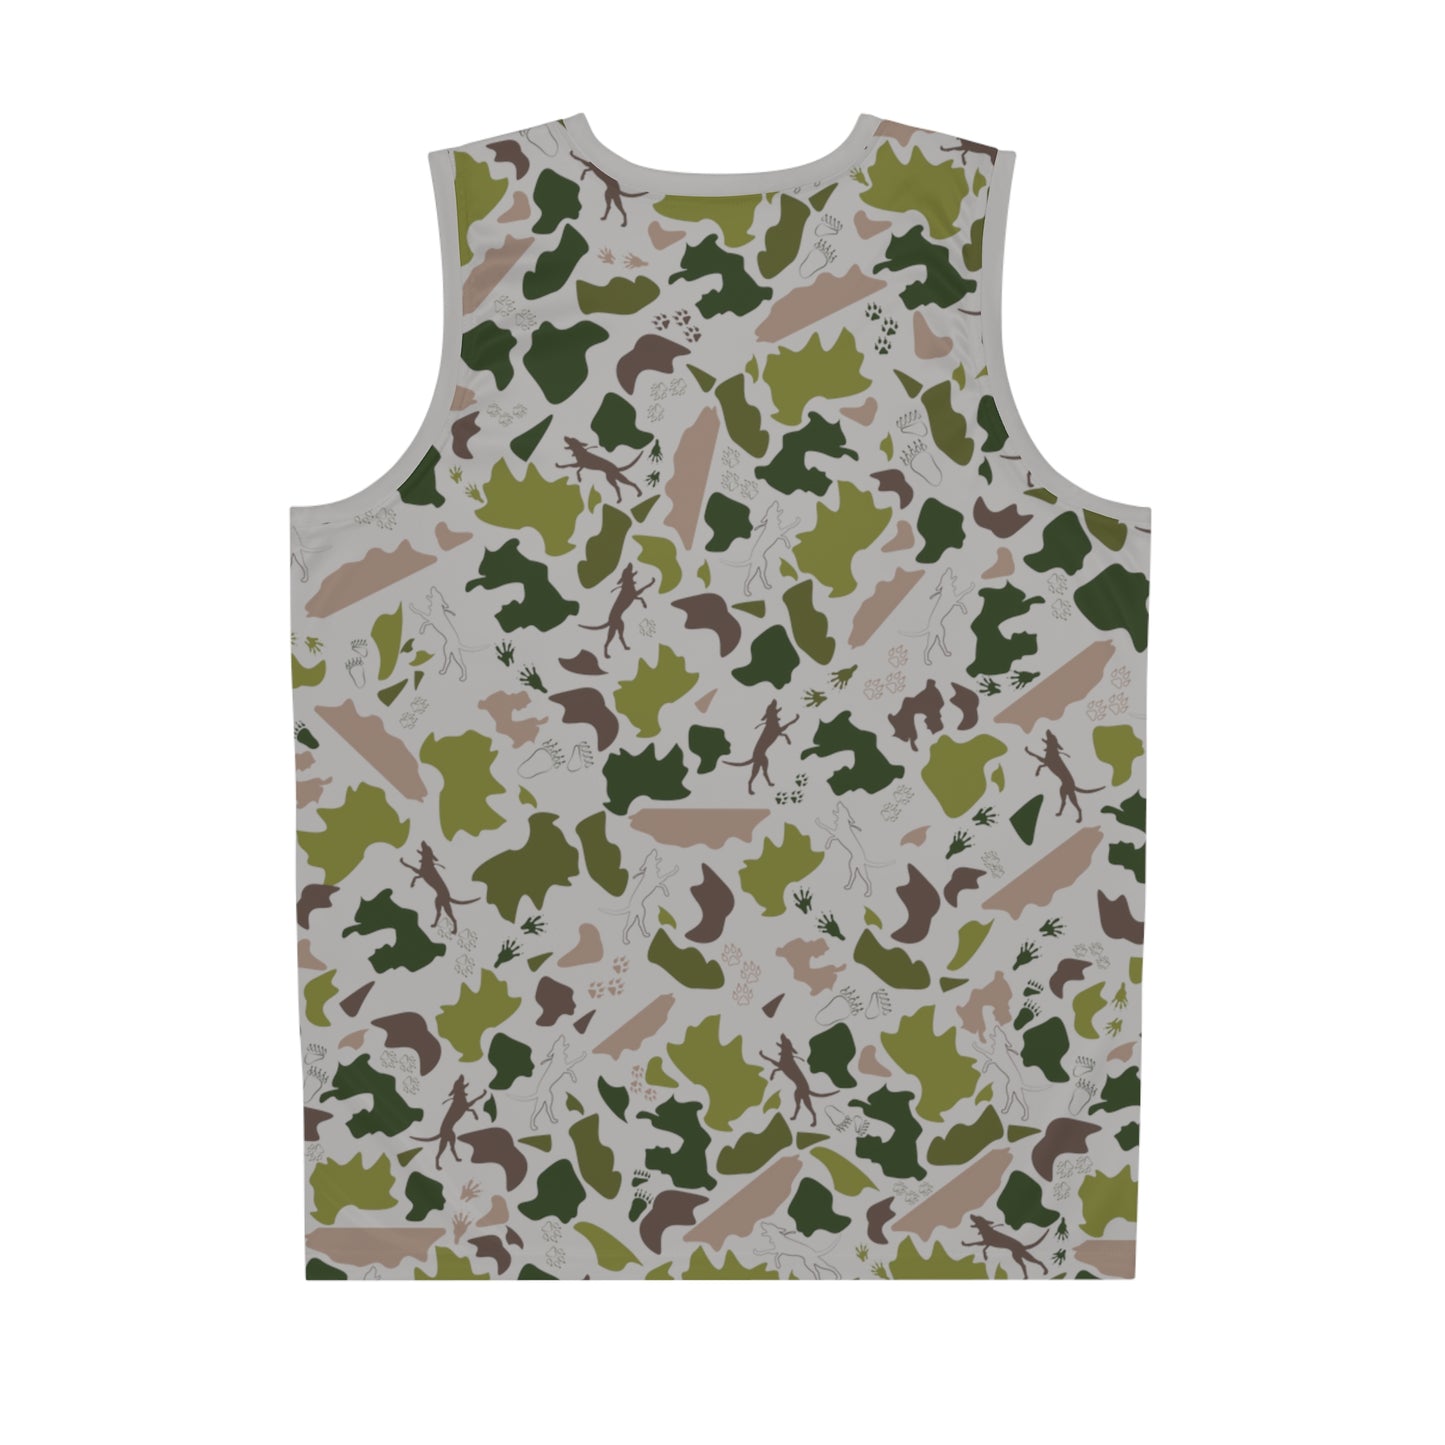 Grey basketball jersey in green and brown camouflage